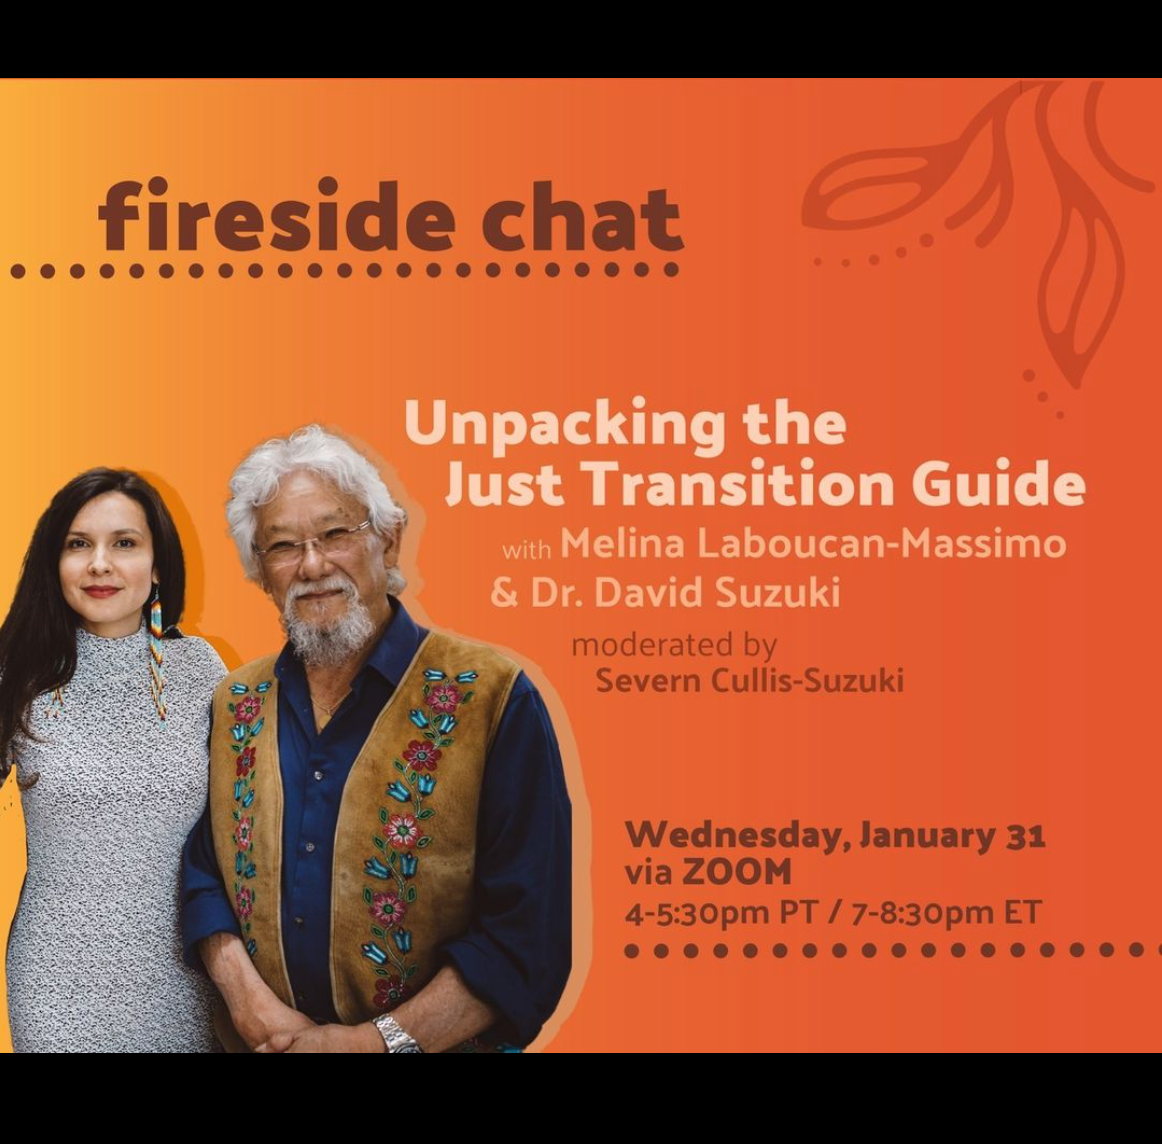 Fireside chat: Unpacking the Just Transition Guide with Melina Laboucan-Massimo & Dr. David Suzuki (Wednesday, January 31 via Zoom | 4-5:30 PT / 7-8:30 ET)